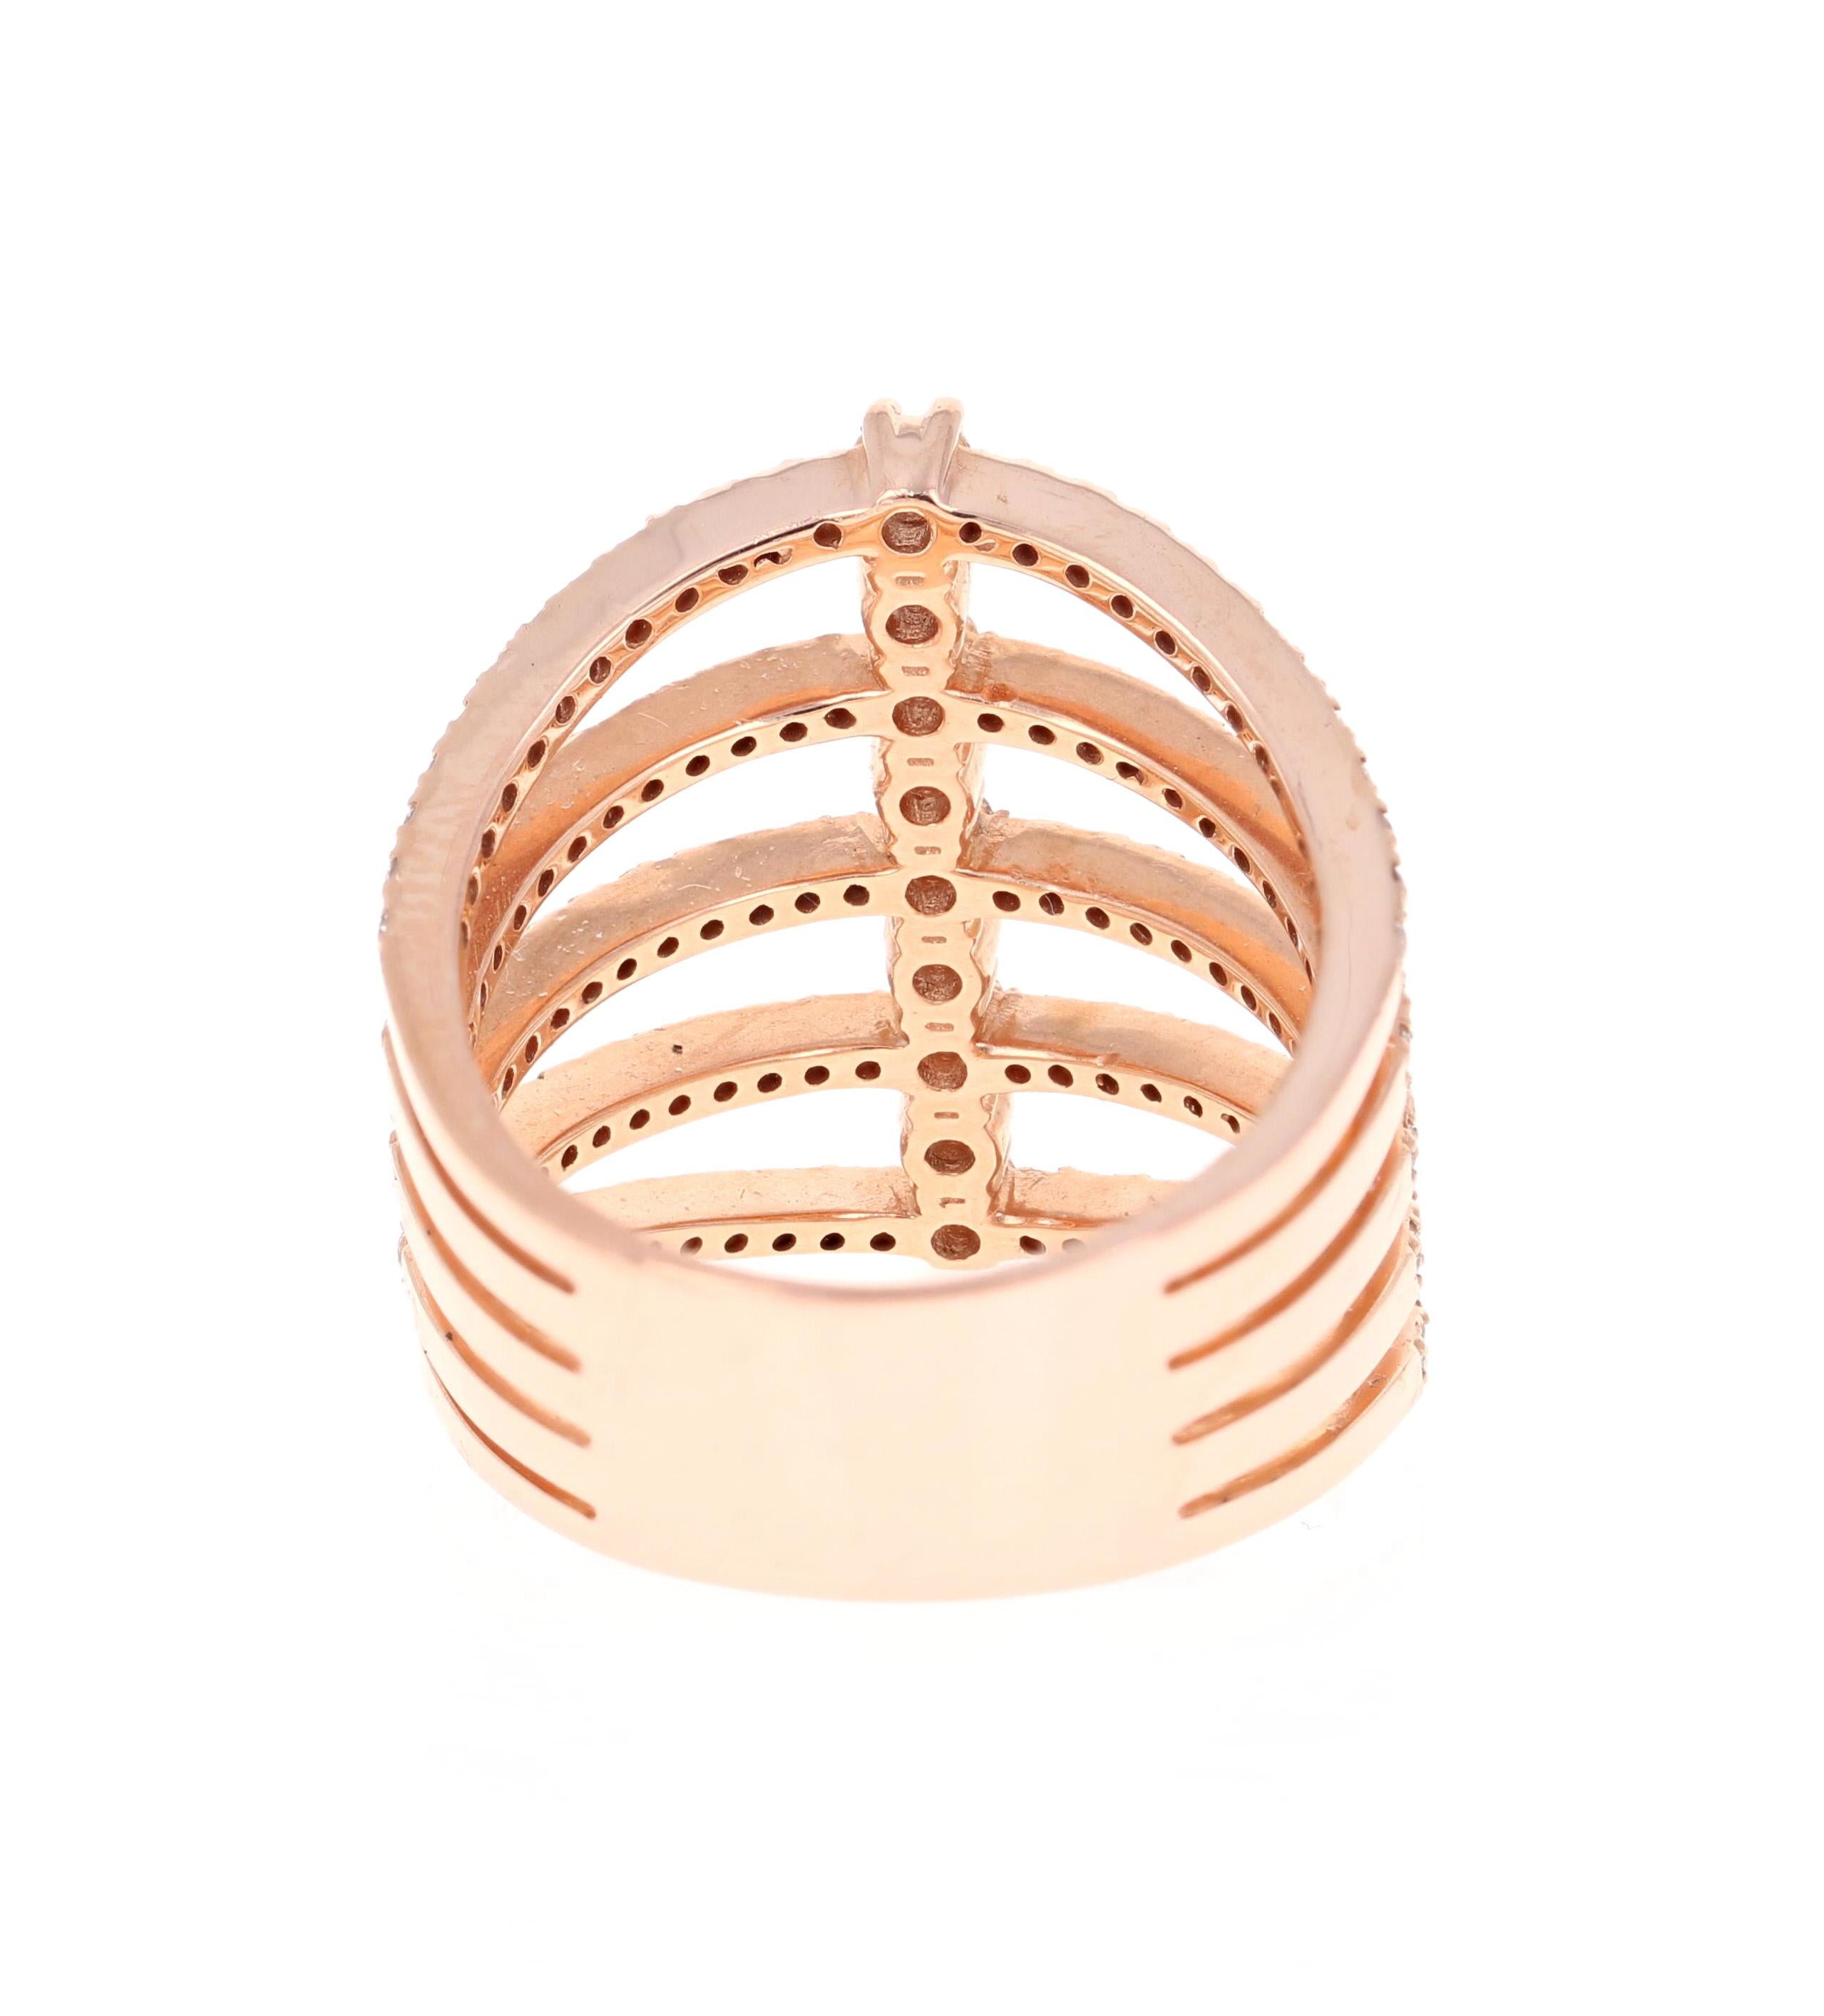 Round Cut 1.23 Carat Natural Diamond Rose Gold Cocktail Ring For Sale